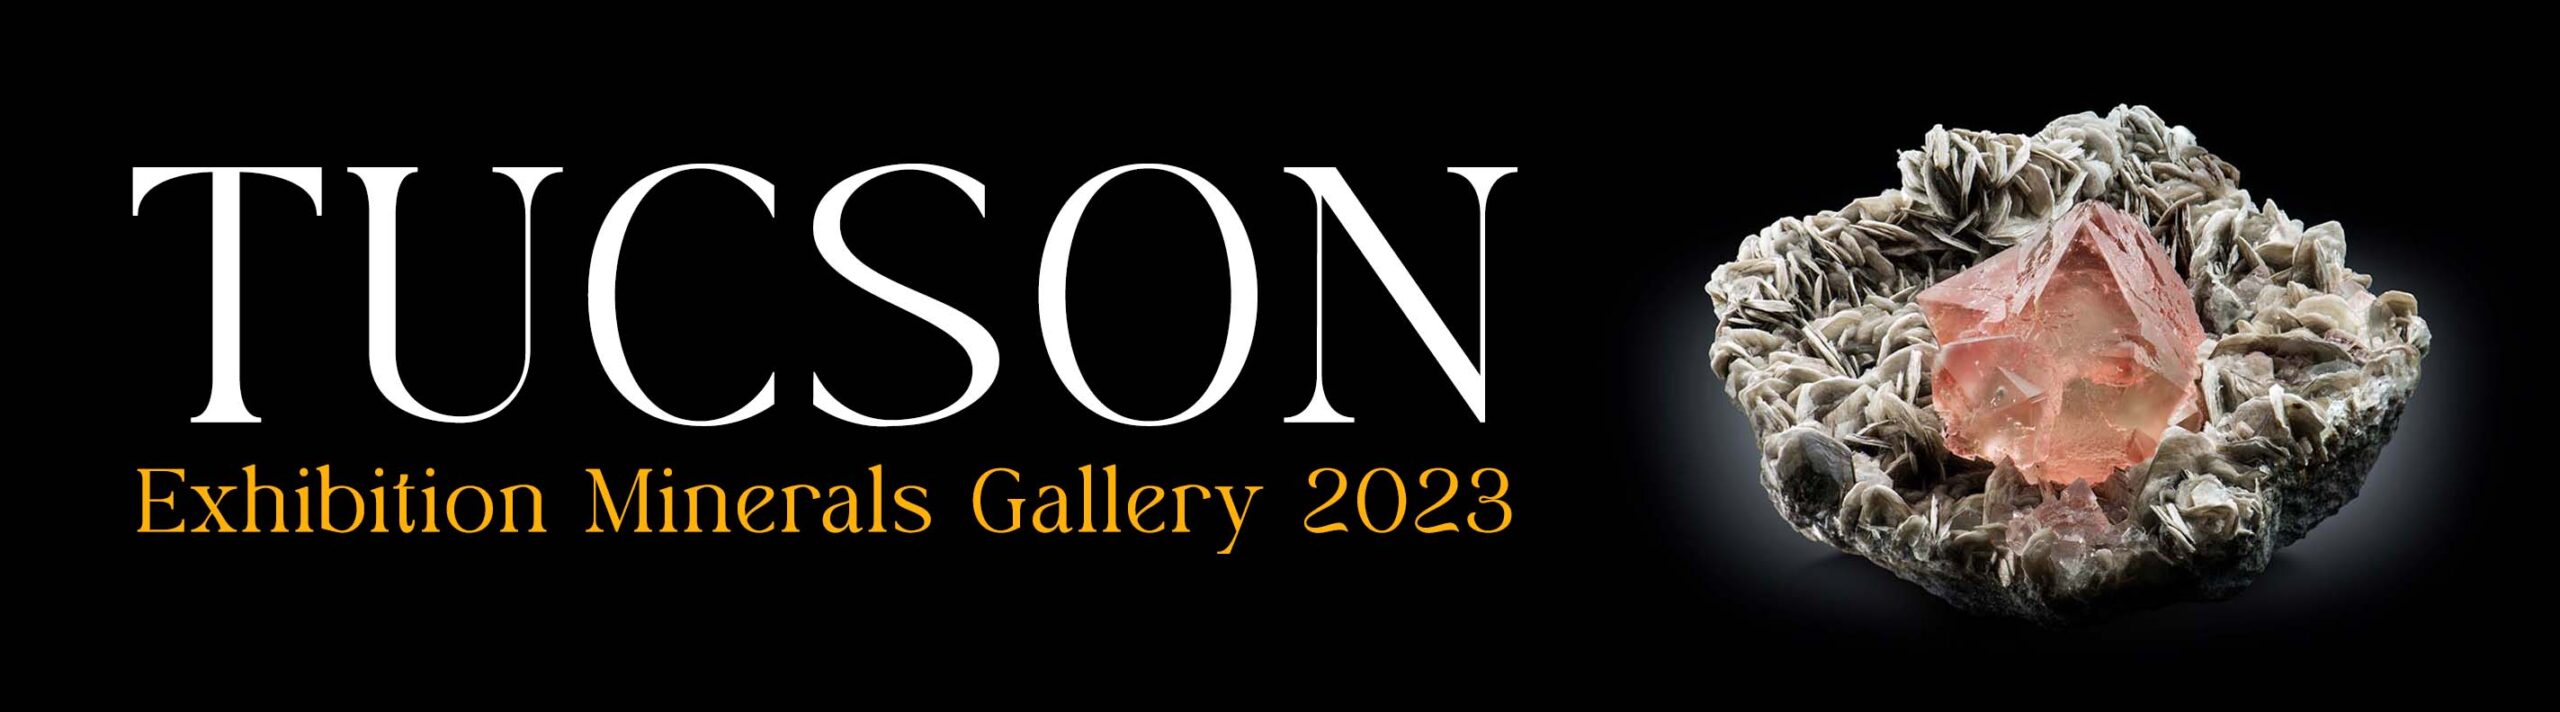 The TUCSON Exhibition Minerals Gallery 2023 Banner 1